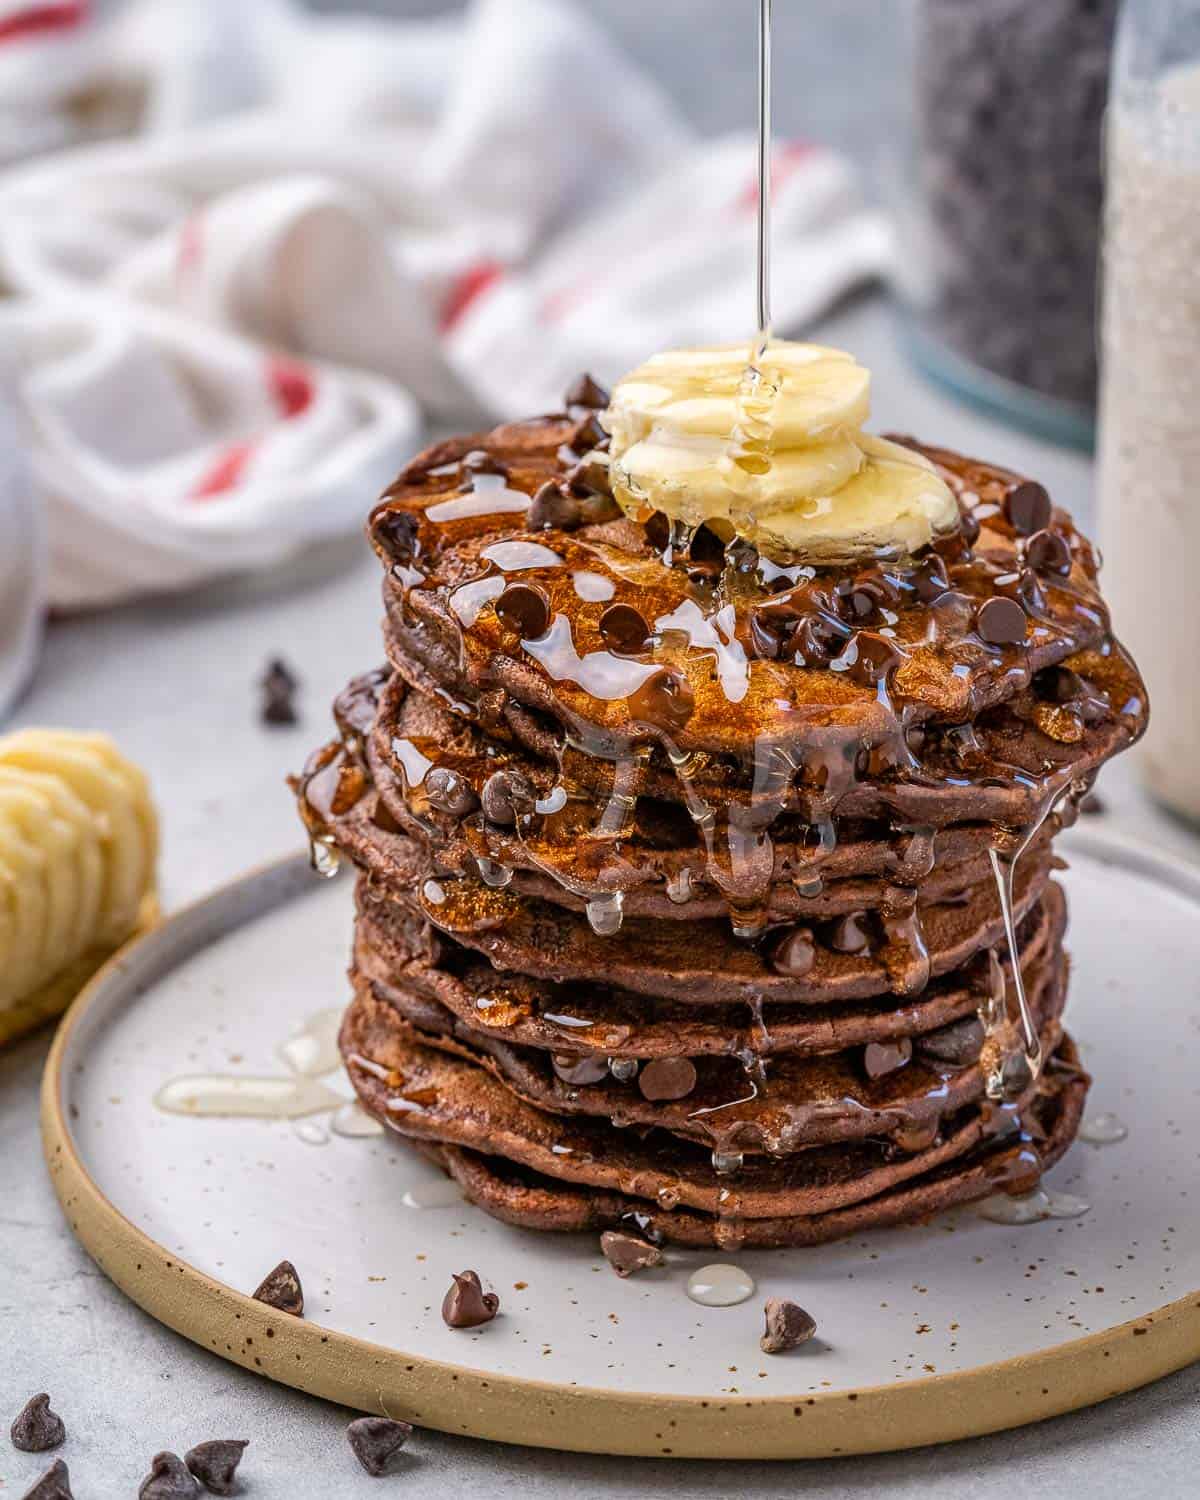 stack of chocolate pancakes with banana, chocolate chips, syrup